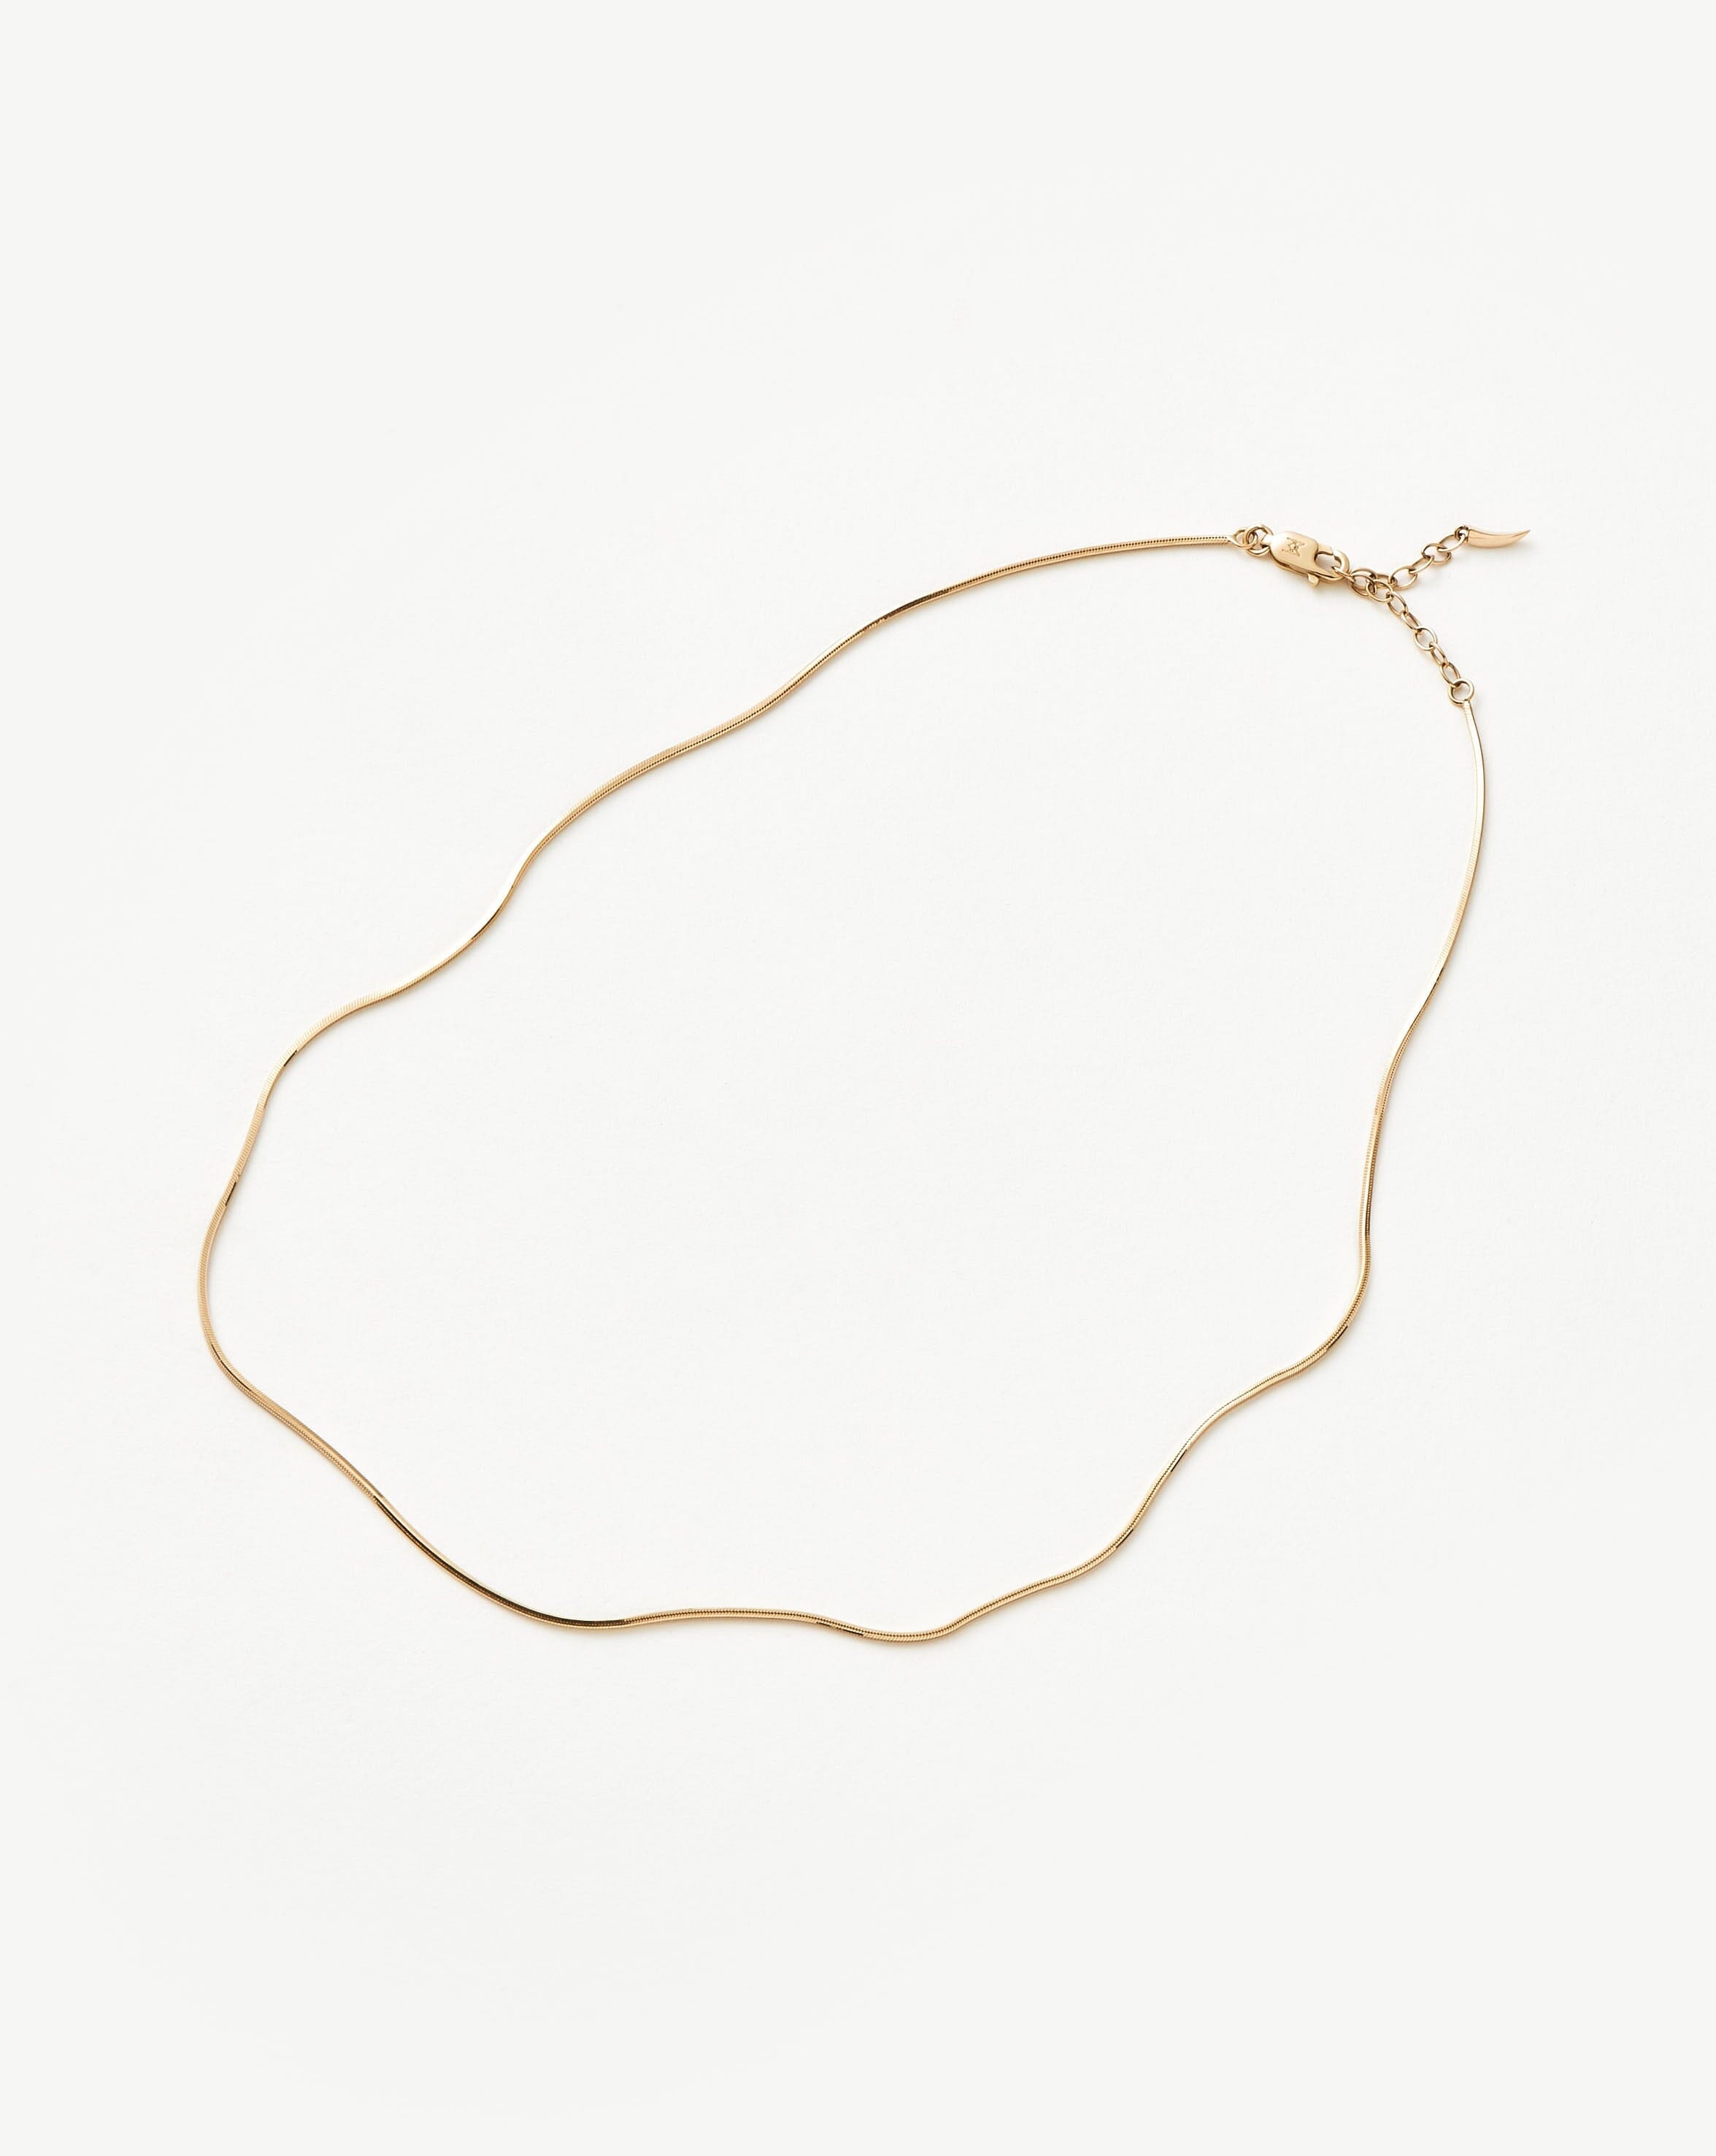 Fine Square Snake Chain Necklace Necklaces | Missoma